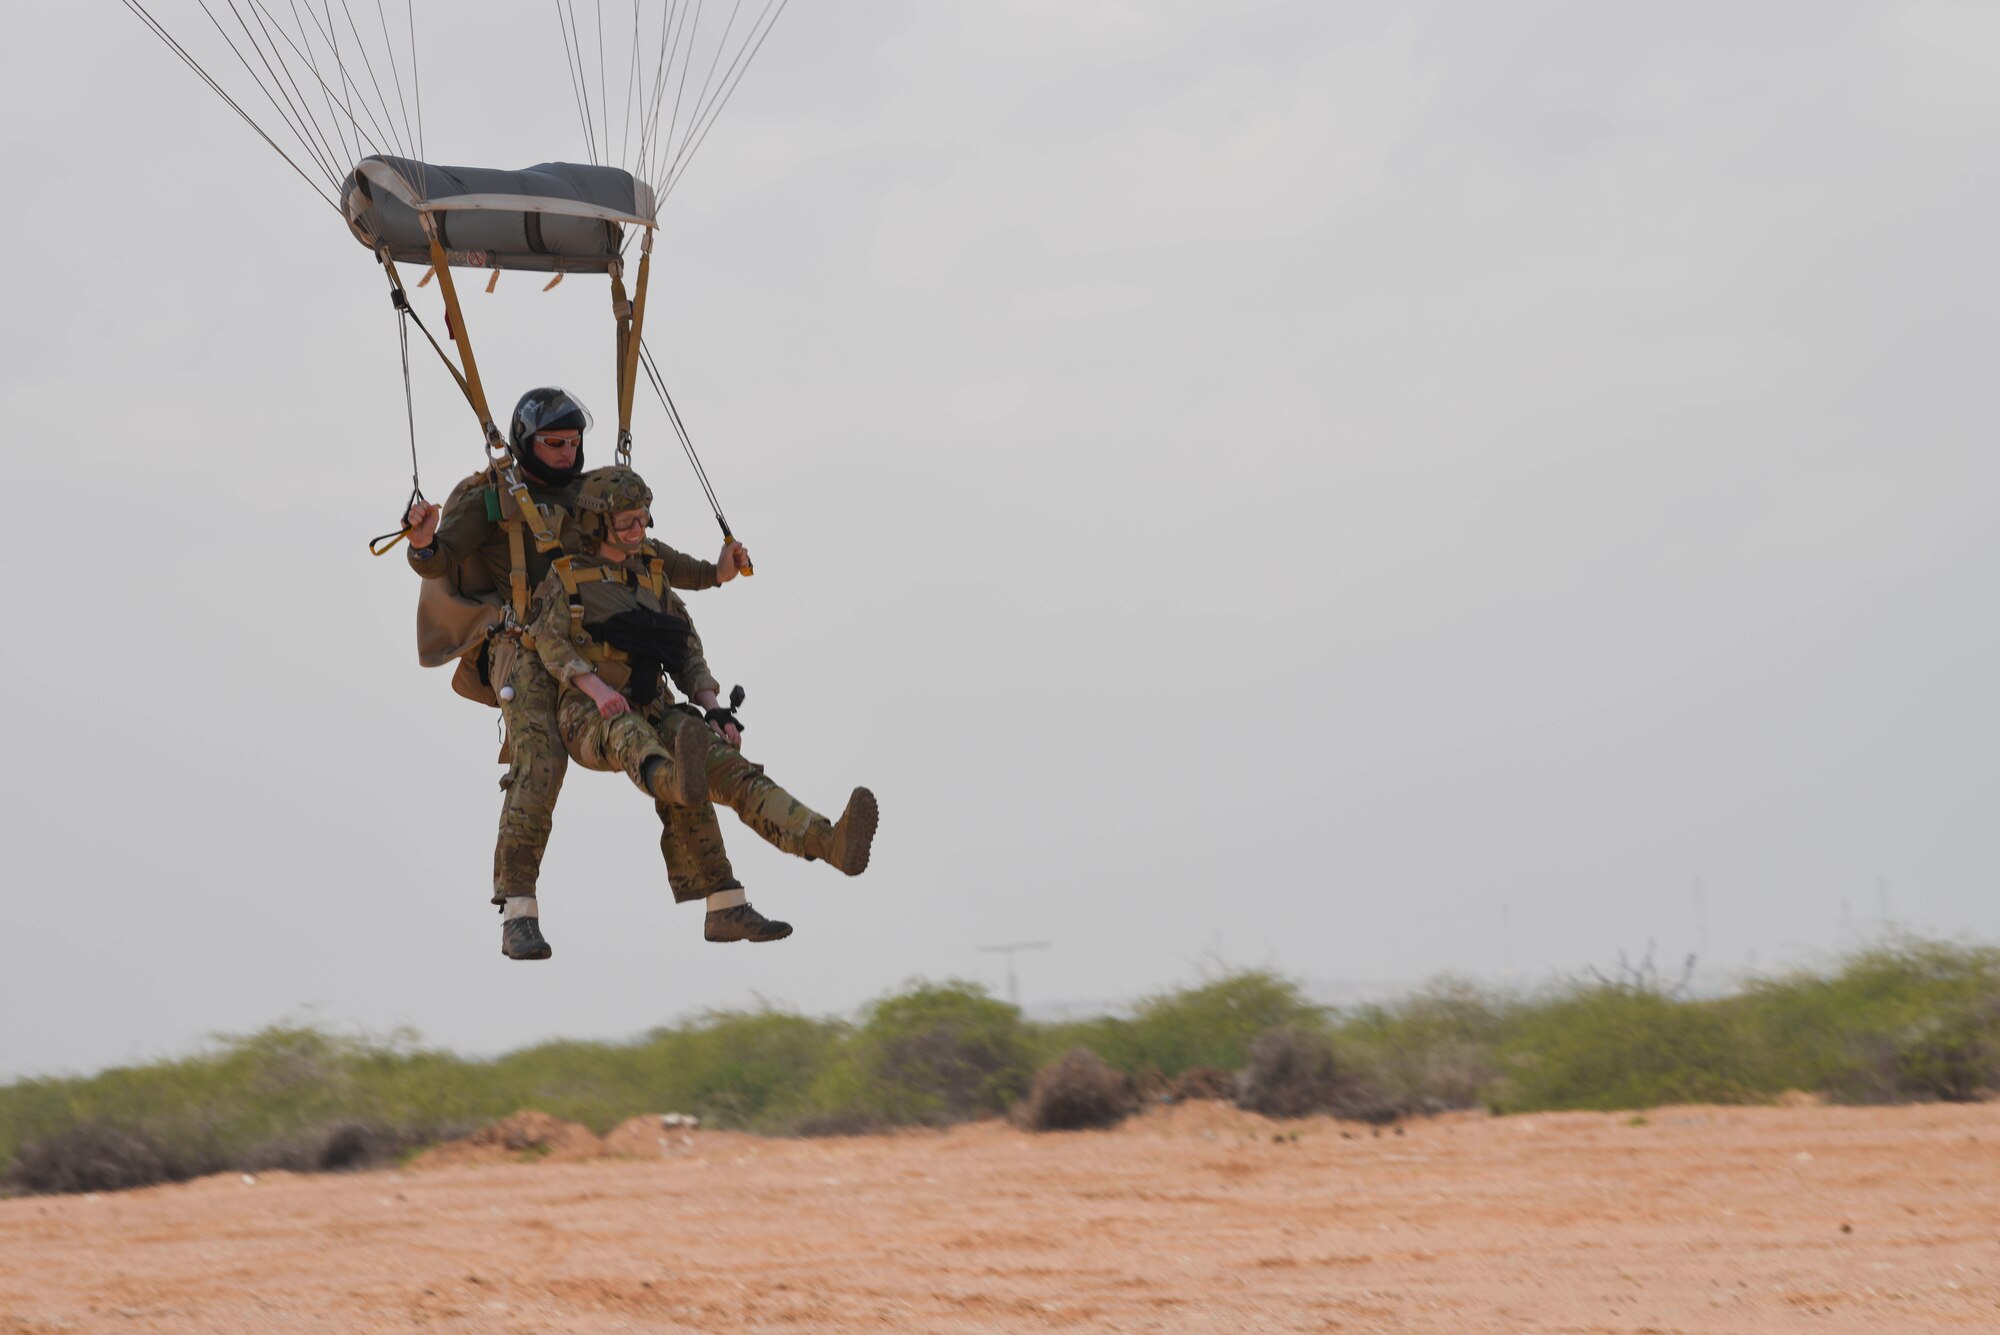 A U.S. Air Force pararescueman assigned to the 82nd Expeditionary Rescue Squadron, prepares to land after a tandem jump at Camp Lemonnier, Djibouti, March 16, 2021.